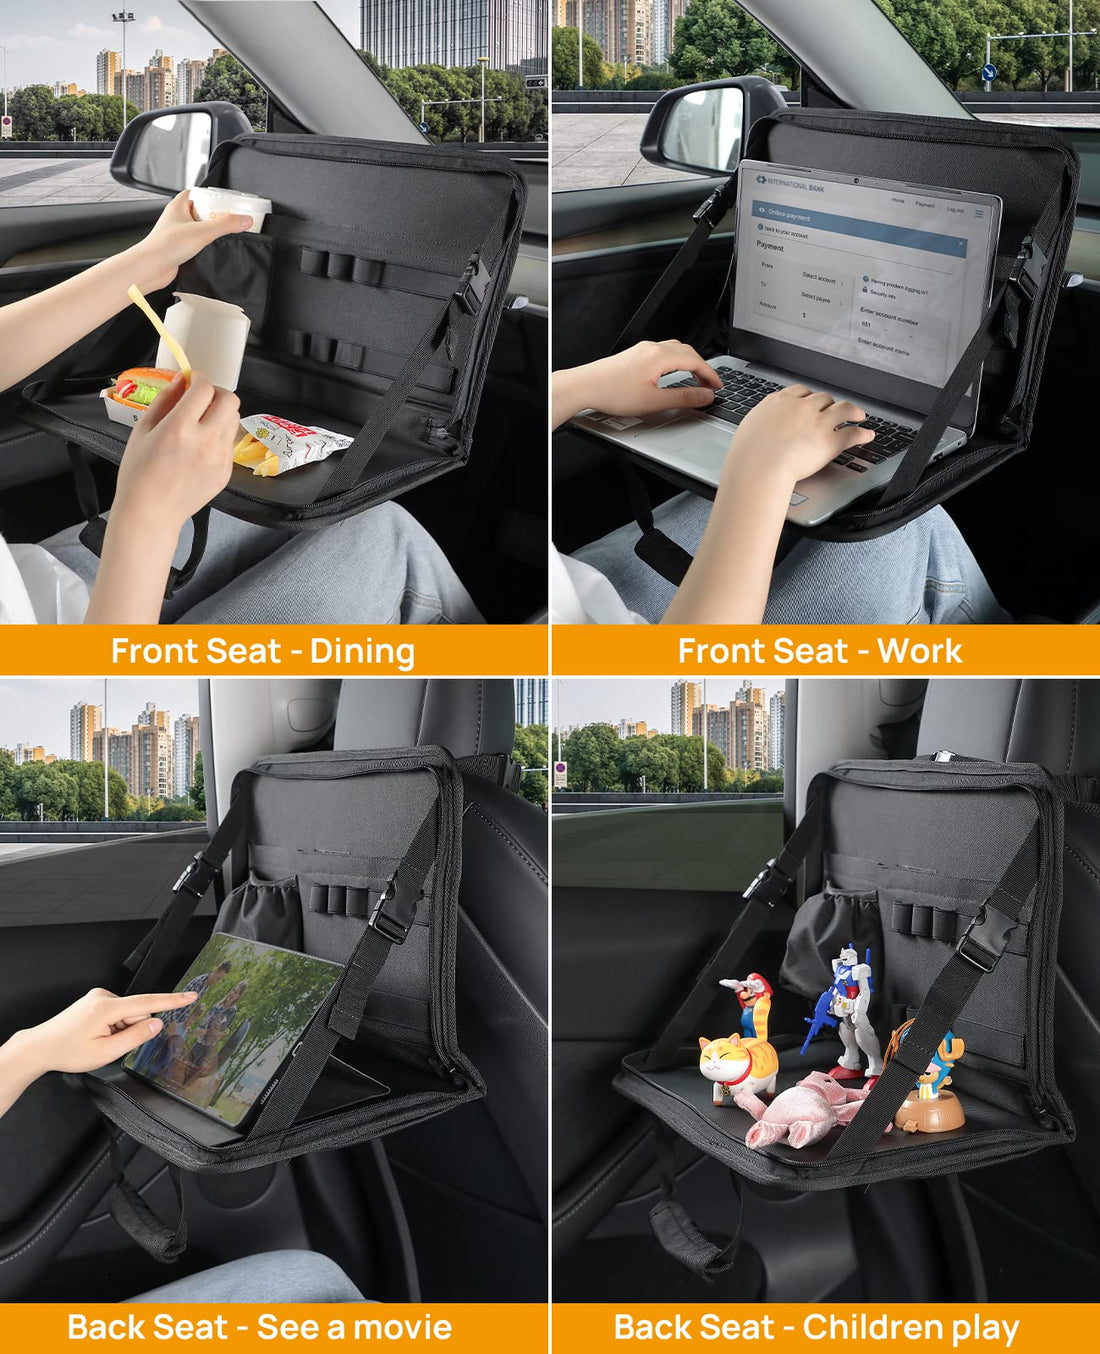 3 in 1 Steering Wheel Eating Tray Upgraded(16.1 * 10 inch), Car Back Seat Laptop Desk